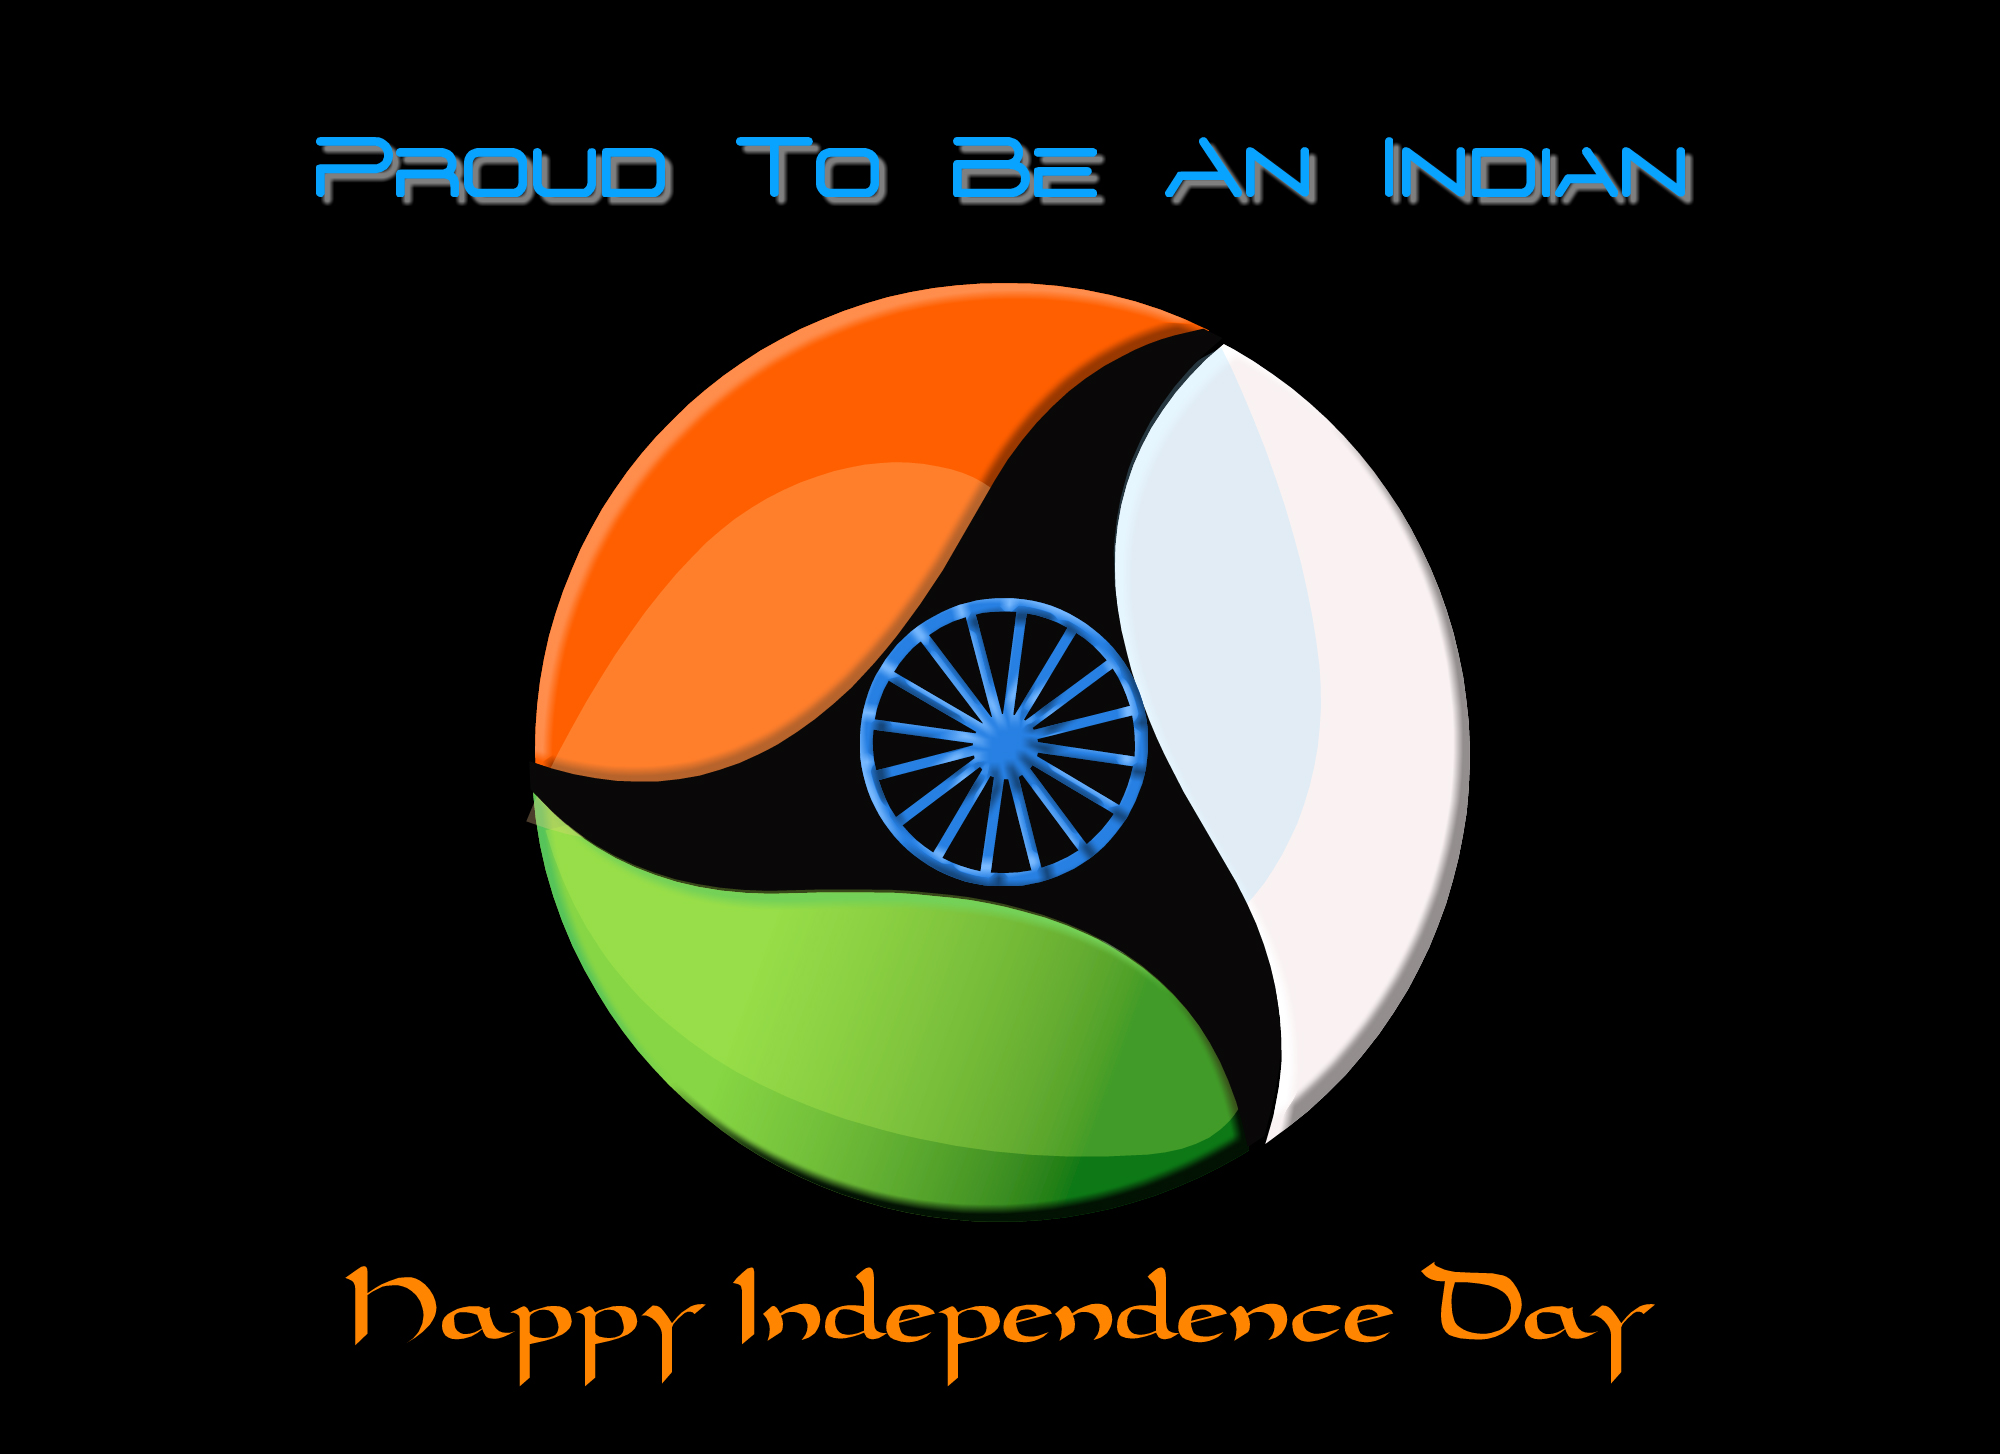 Proud To Be An Indian Happy Independence Day Ashok - Happy Independence Day 2017 India - HD Wallpaper 